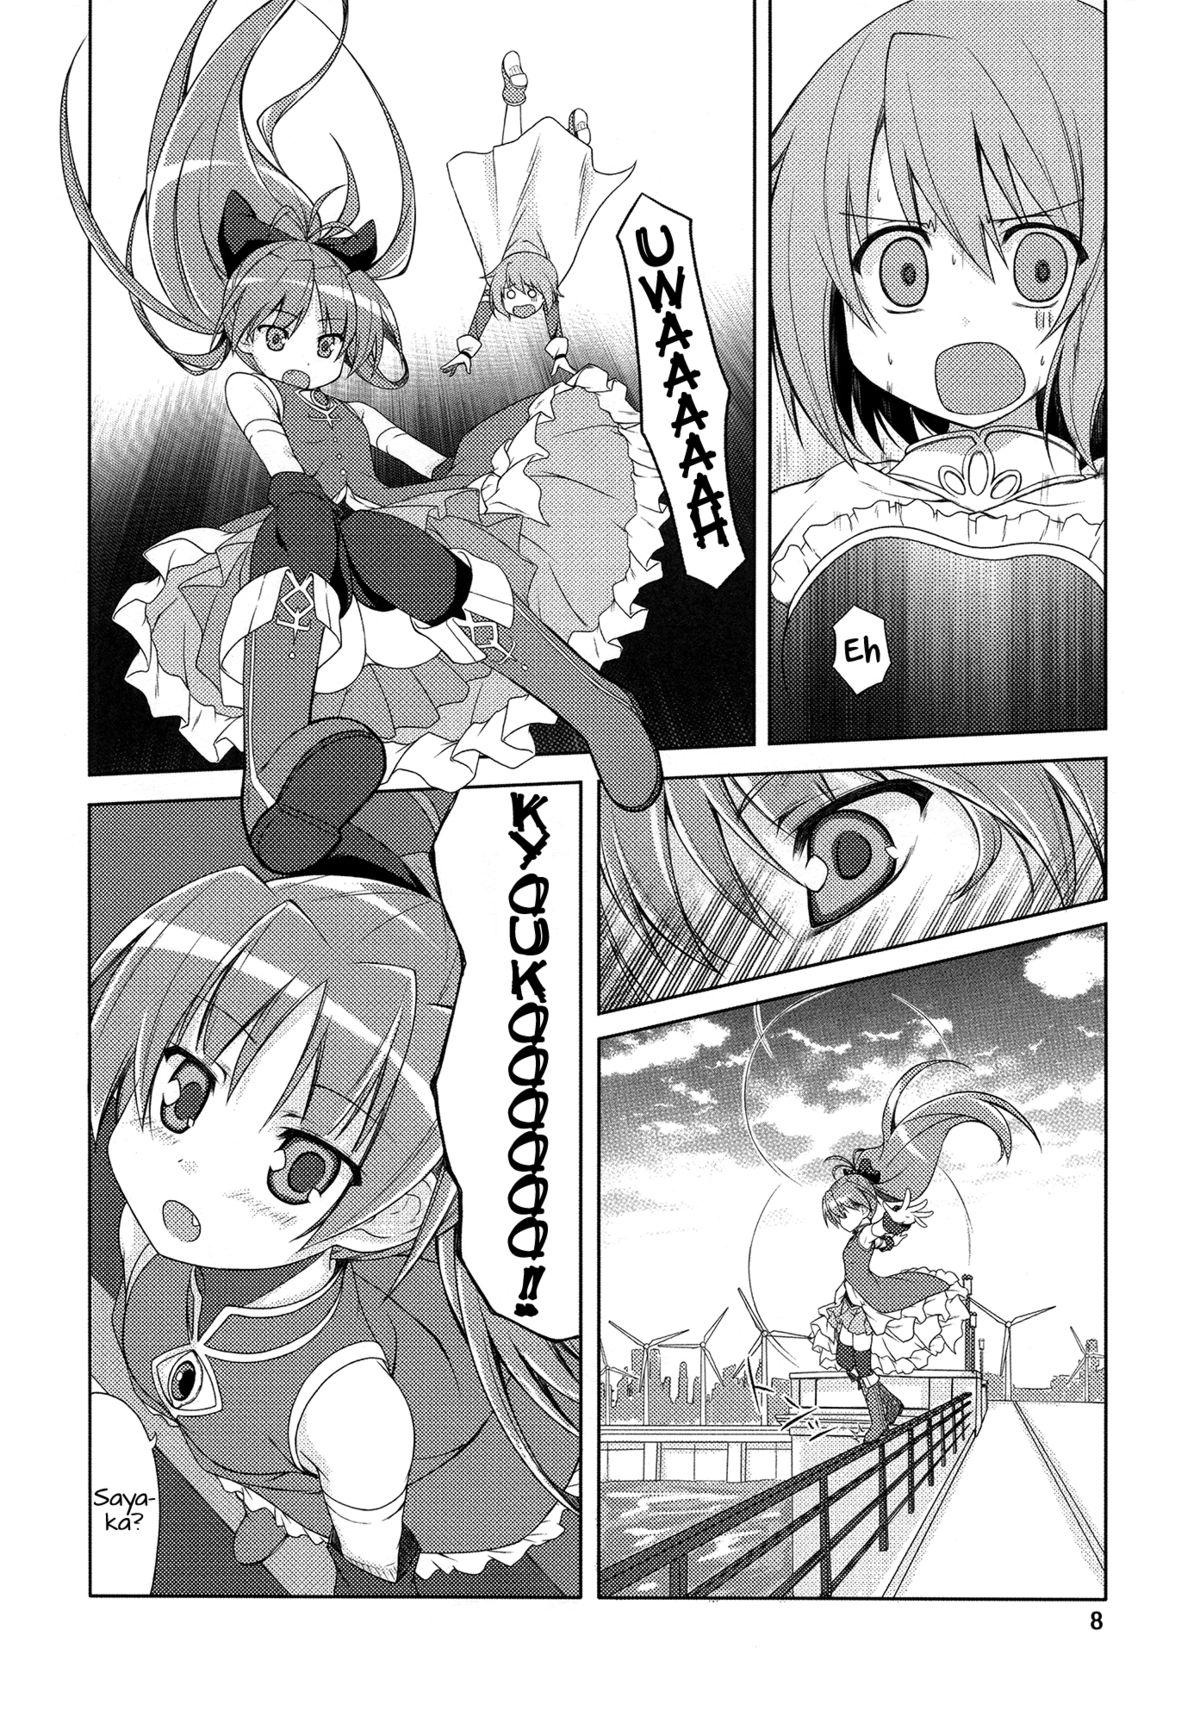 Colombia Be with you - Puella magi madoka magica Outdoor - Page 7